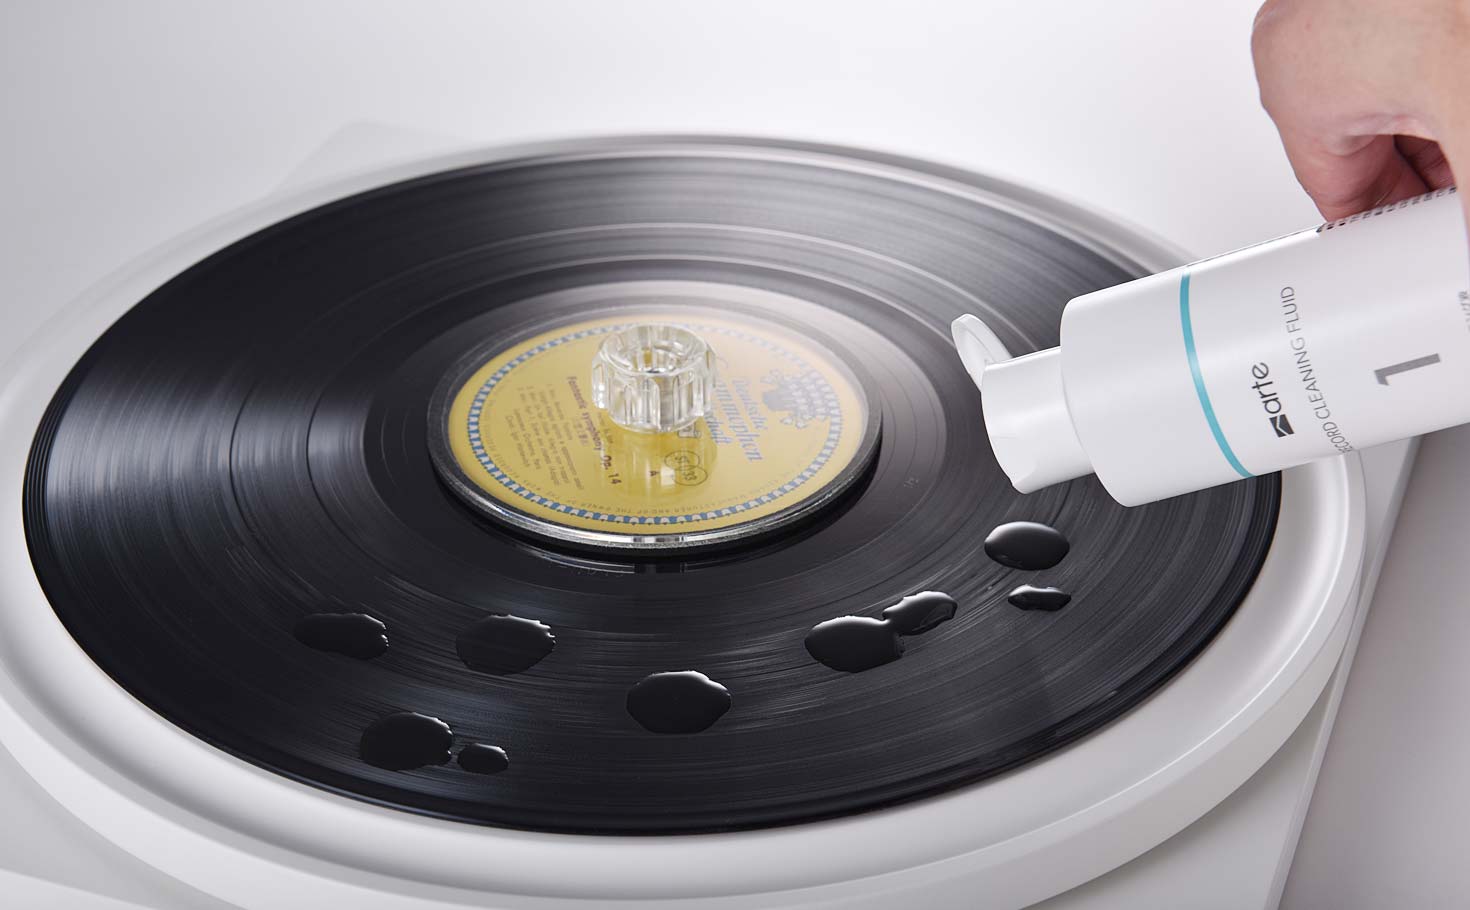 arte record cleaner